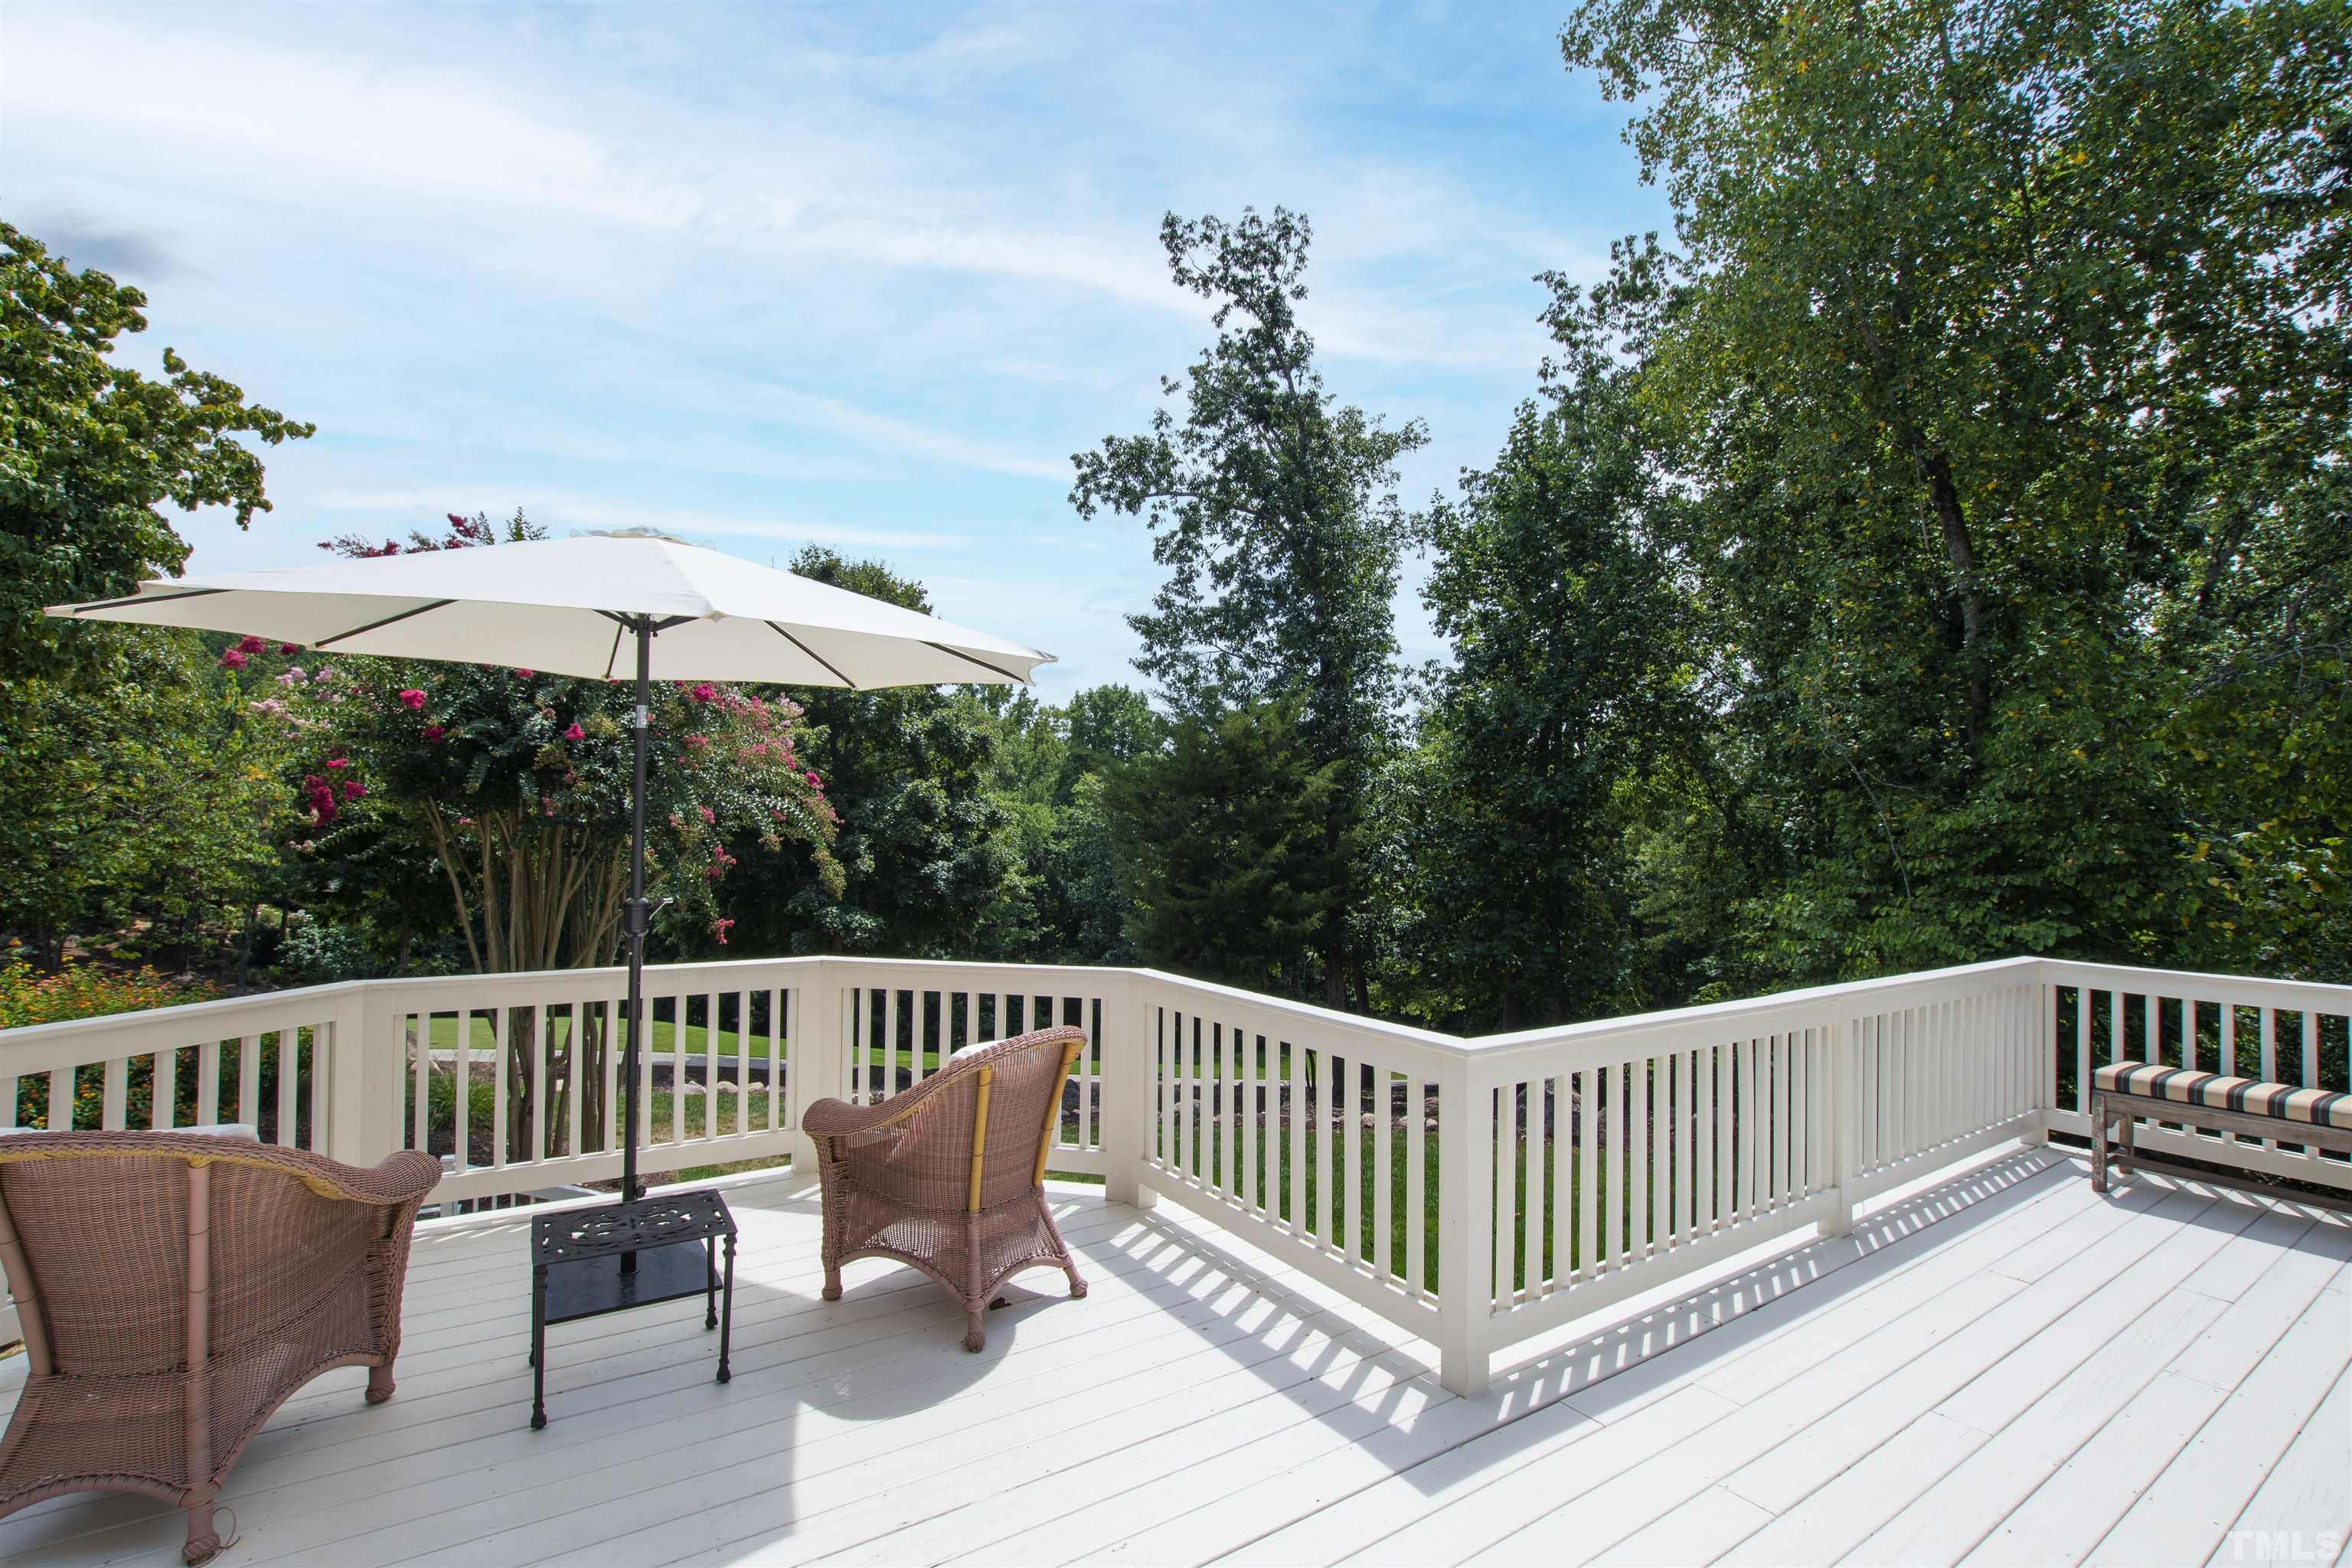 Expansive deck provides great views of the golf course.